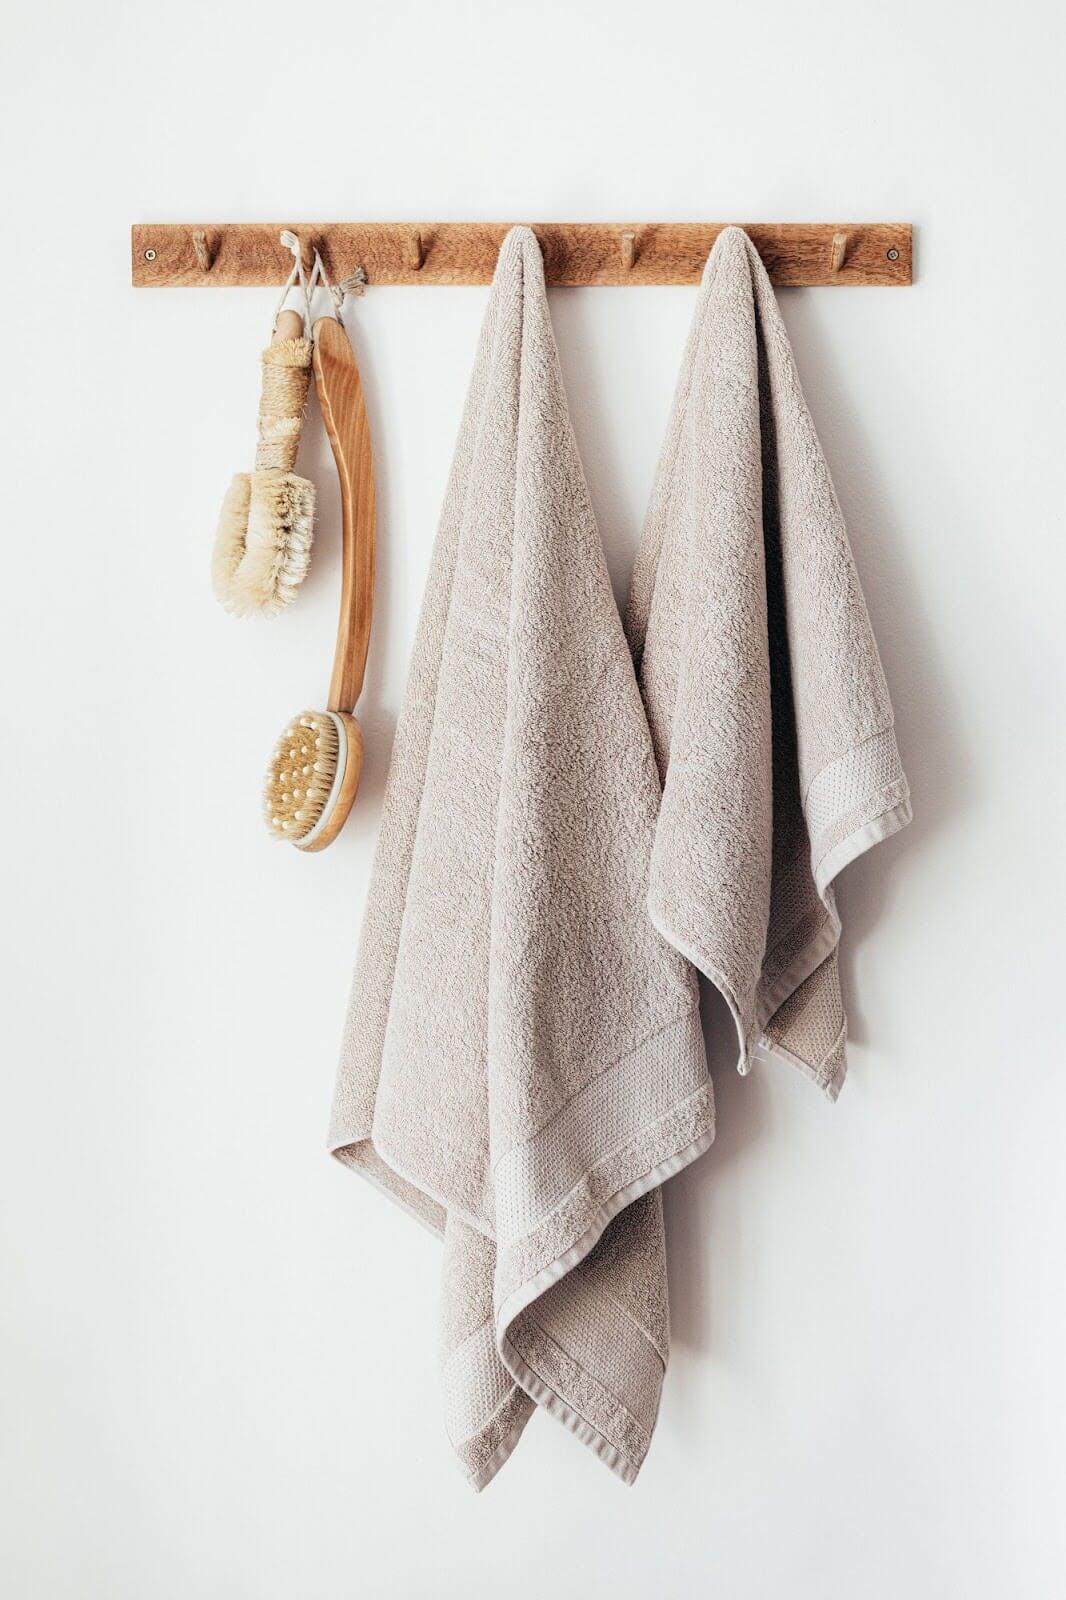 Two towels and cleaning supplies hung up on a wall.